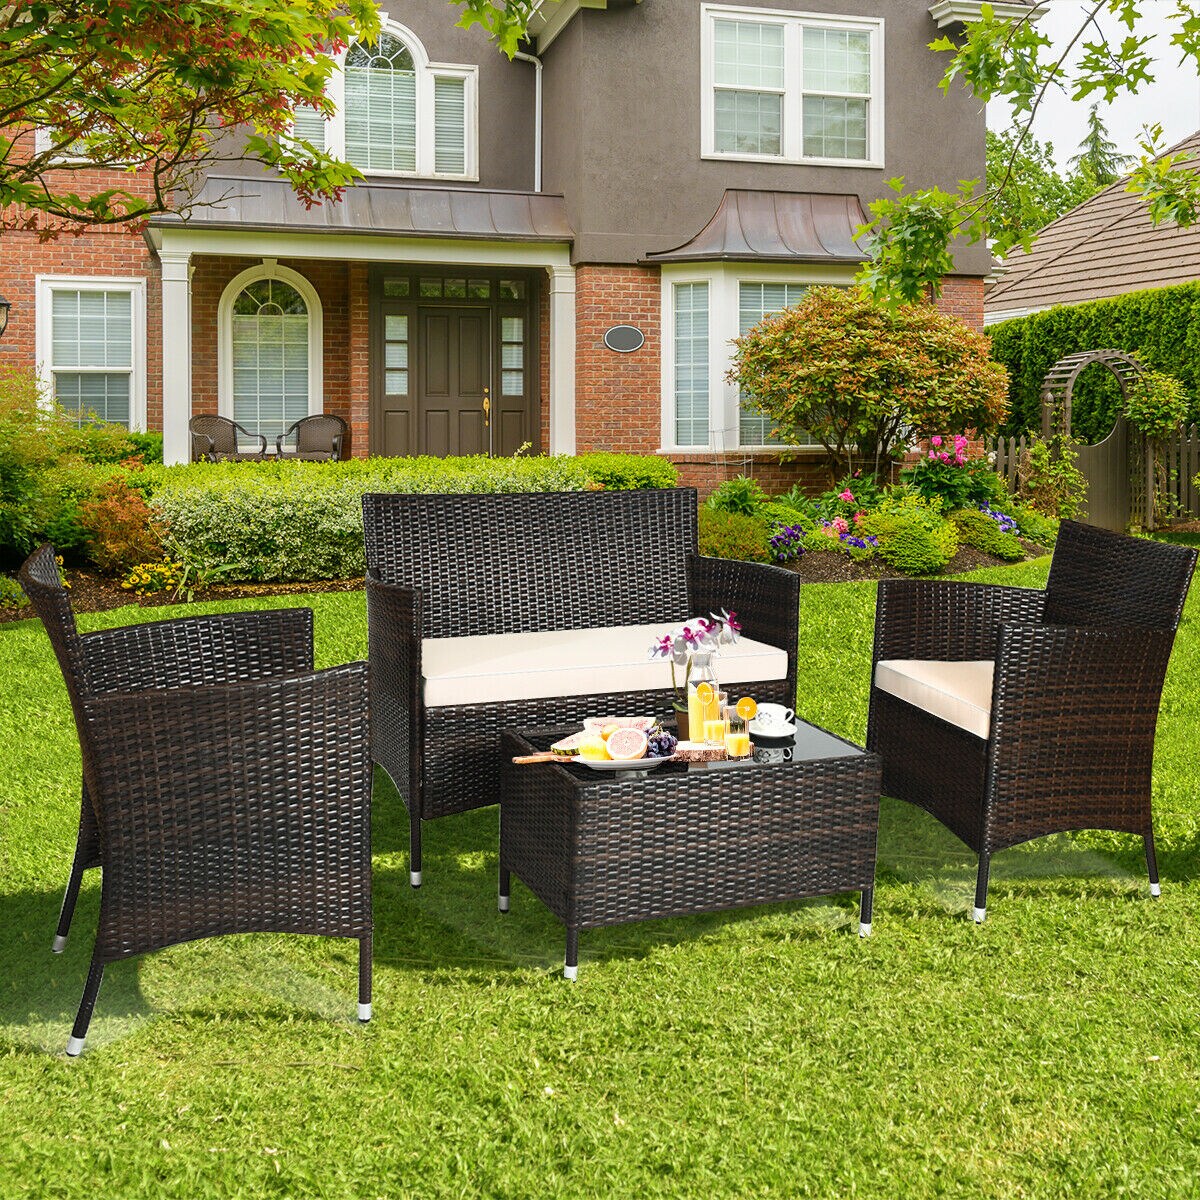 Poolside and Backyard Manual Weaving Conversation Set for Garden w/Tempered Glass Coffee Table Lawn Gray DORTALA 4-Piece Rattan Patio Furniture Set Outdoor Sofa Table Set w/Thick Cushion 